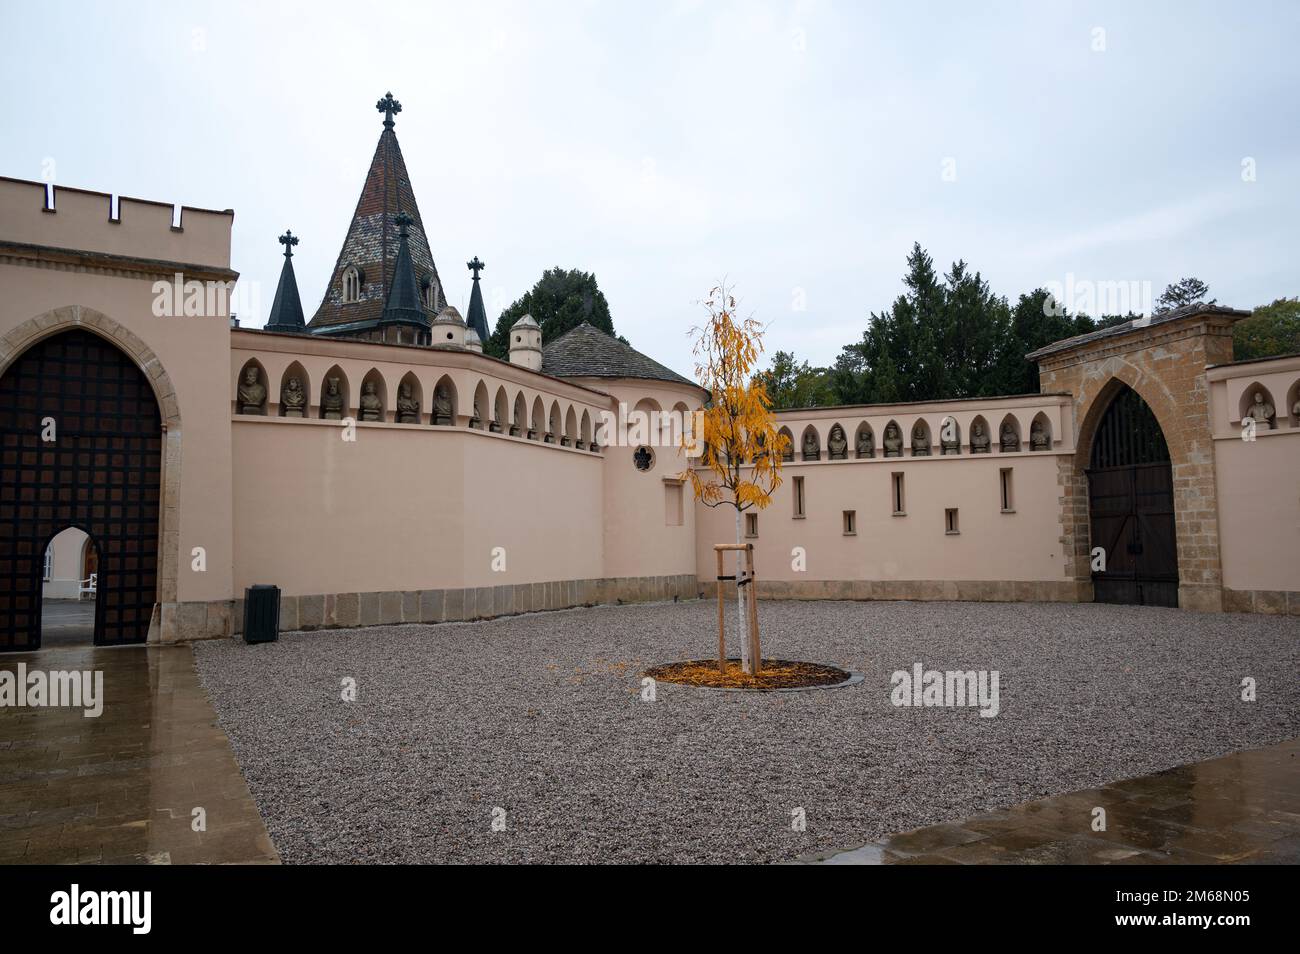 15th october,2022.View of the inner courtyard of the Laxenburg castle at the town of Laxenburg, Austria. Stock Photo